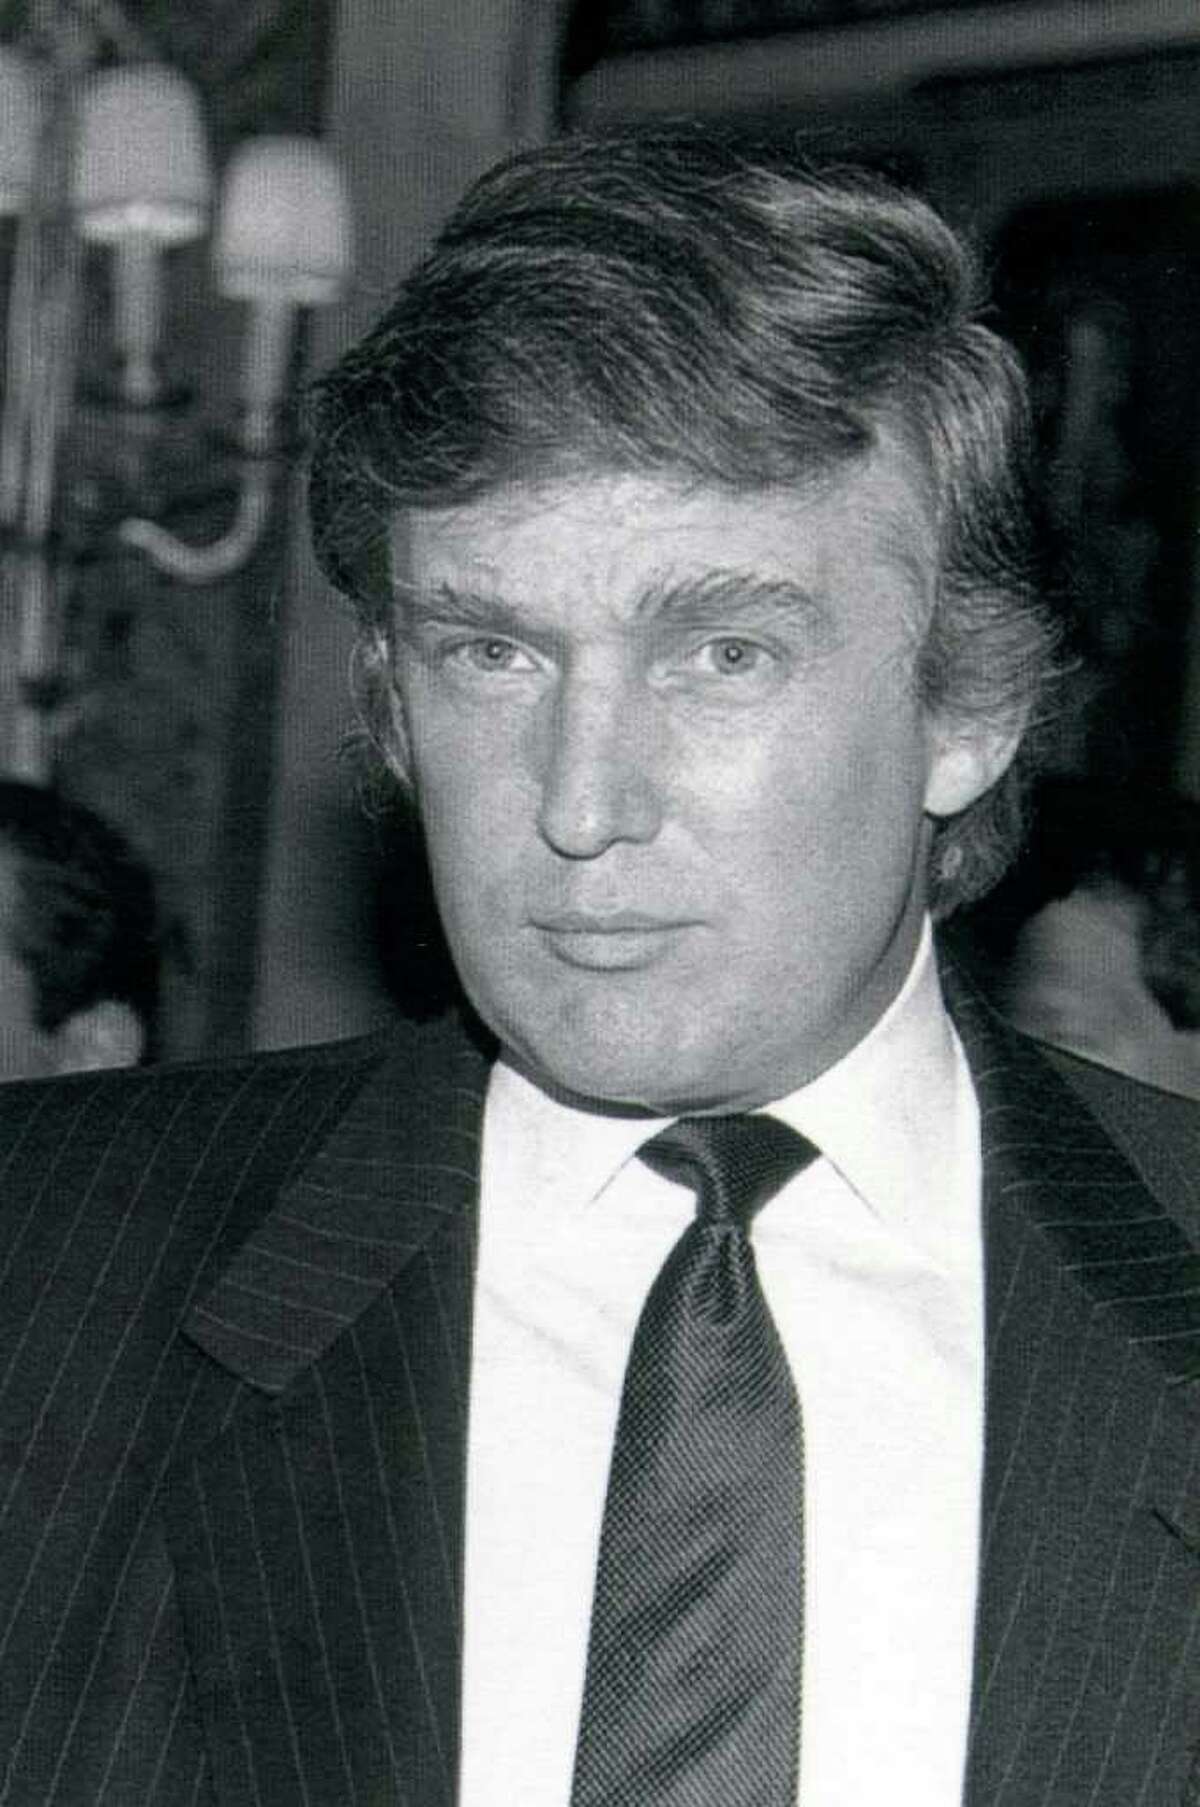 Real estate mogul Donald Trump is seen in this 1991 file photo. Trump missed a payment due on junk bonds used to finance one of his Atlantic City, N.J., resorts on June 15, 1990.